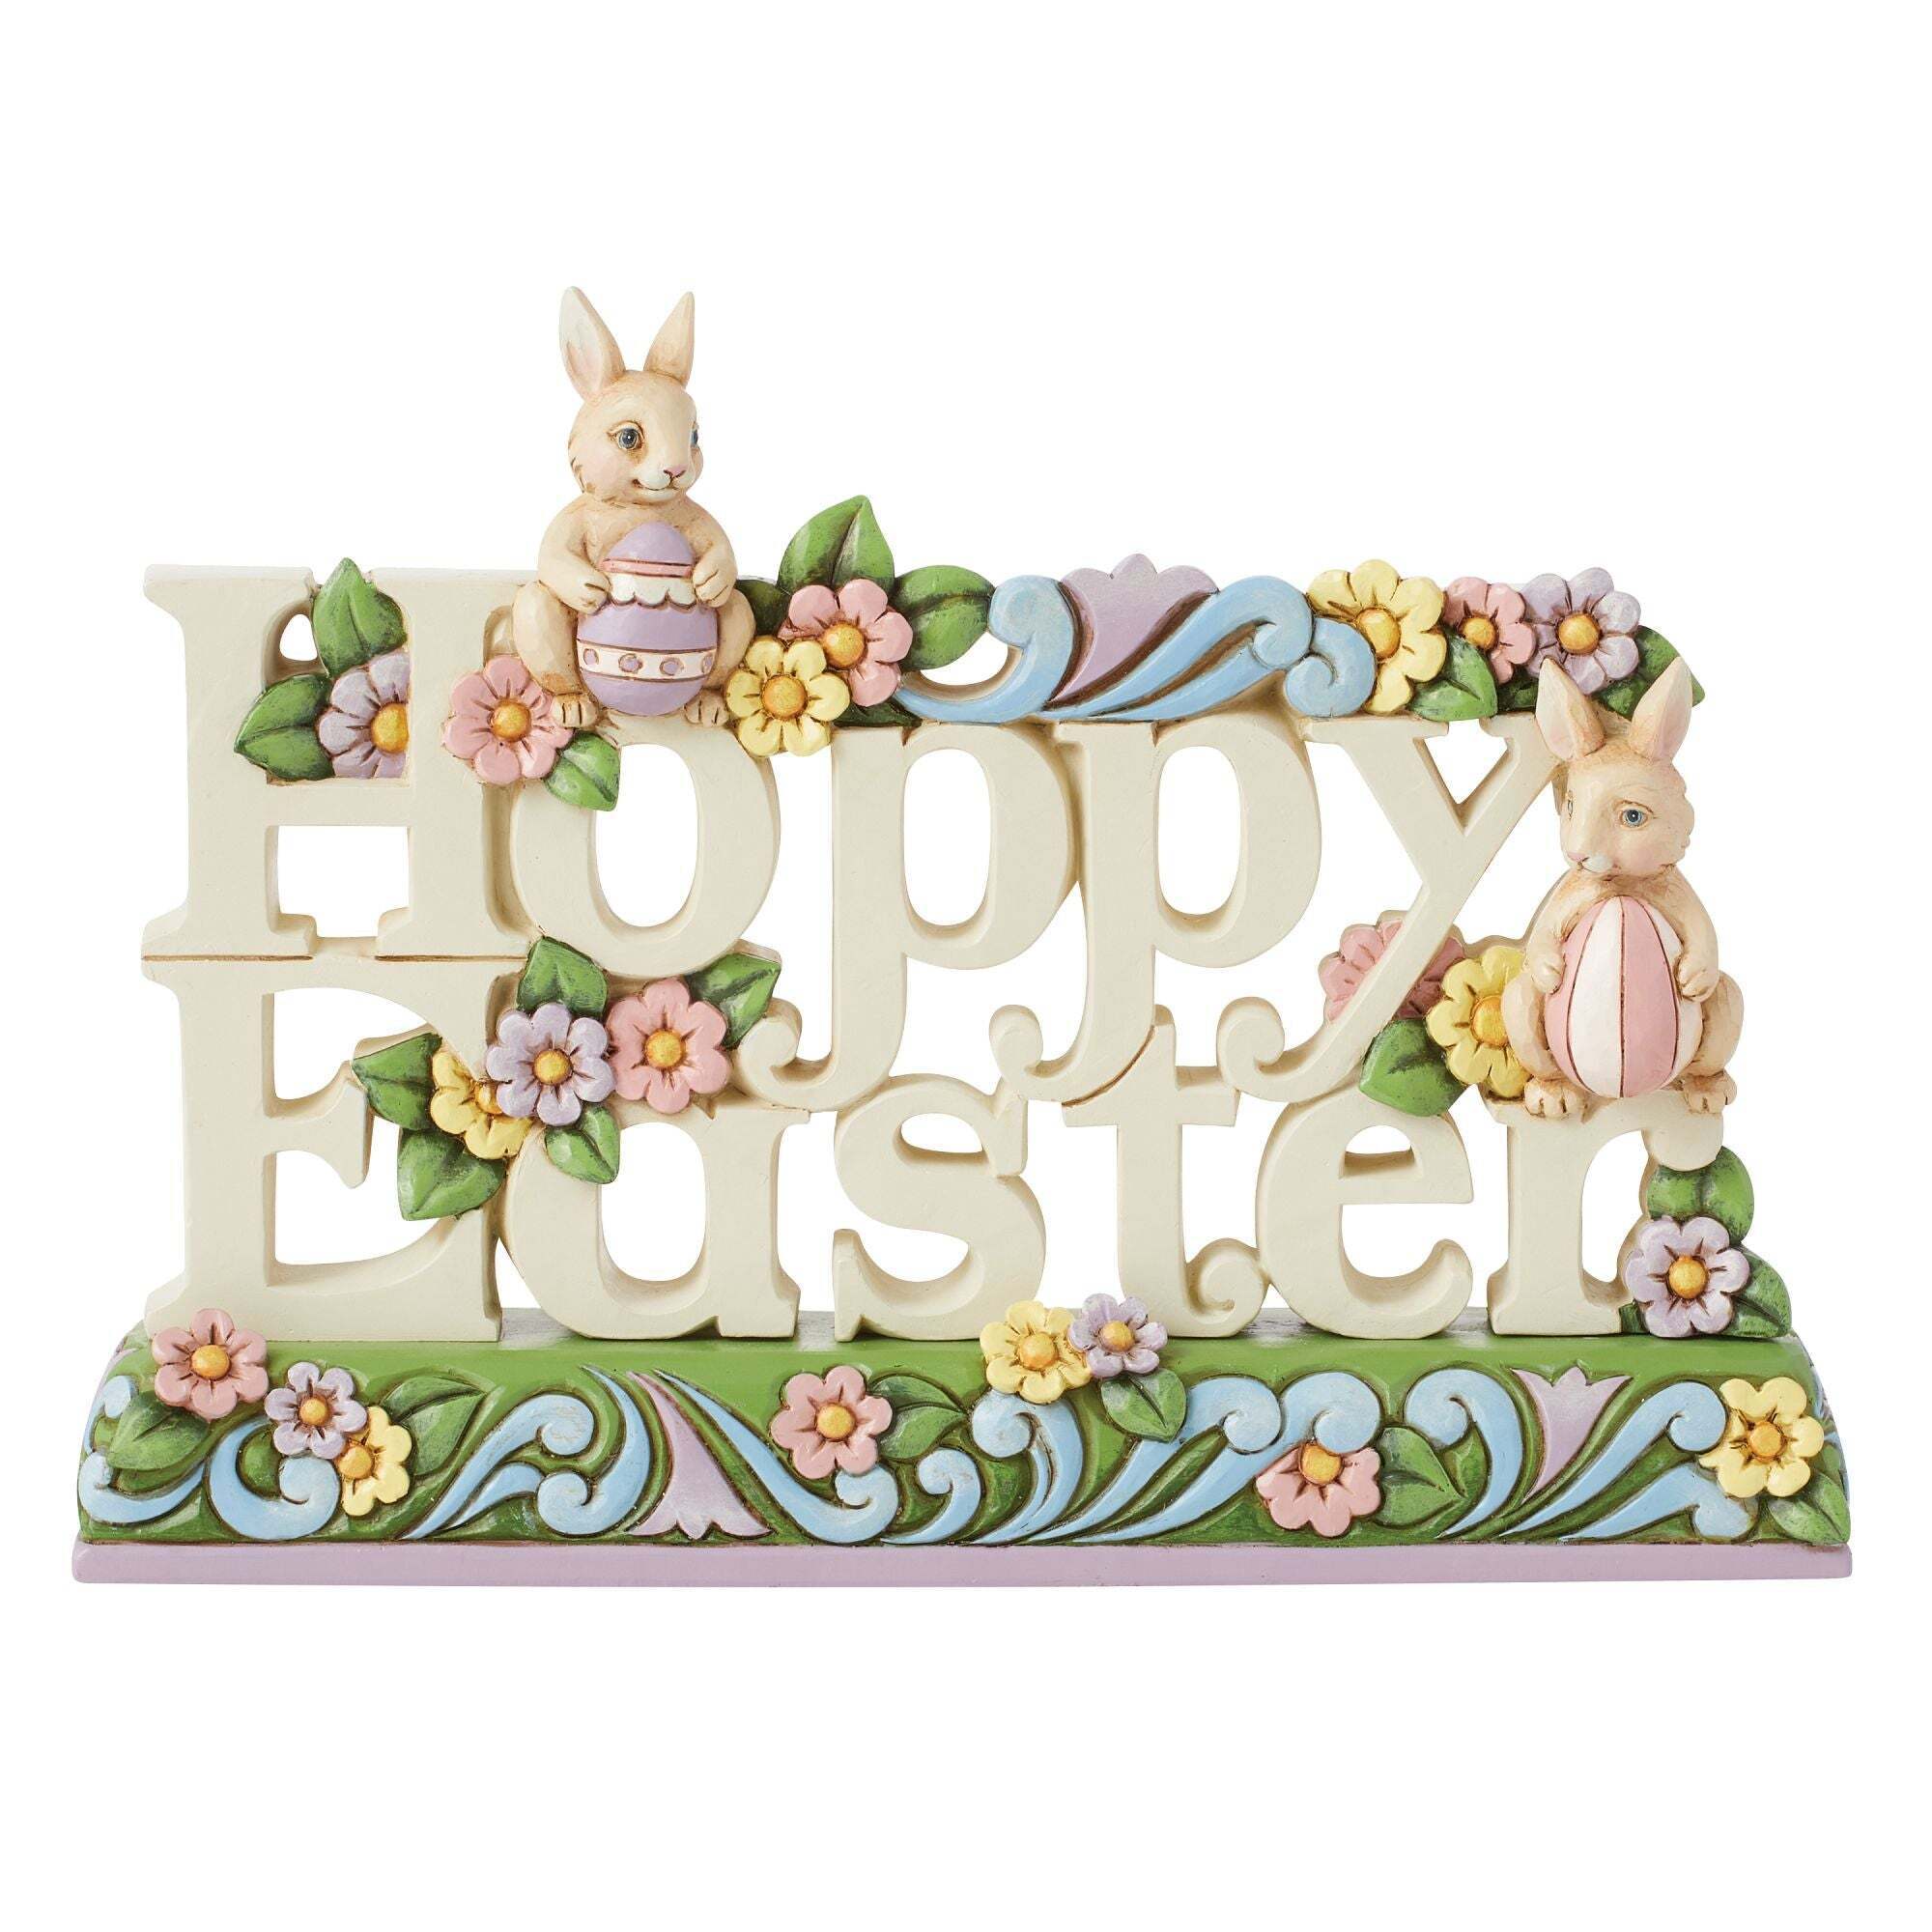 Hoppy Easter with Bunnies Fig